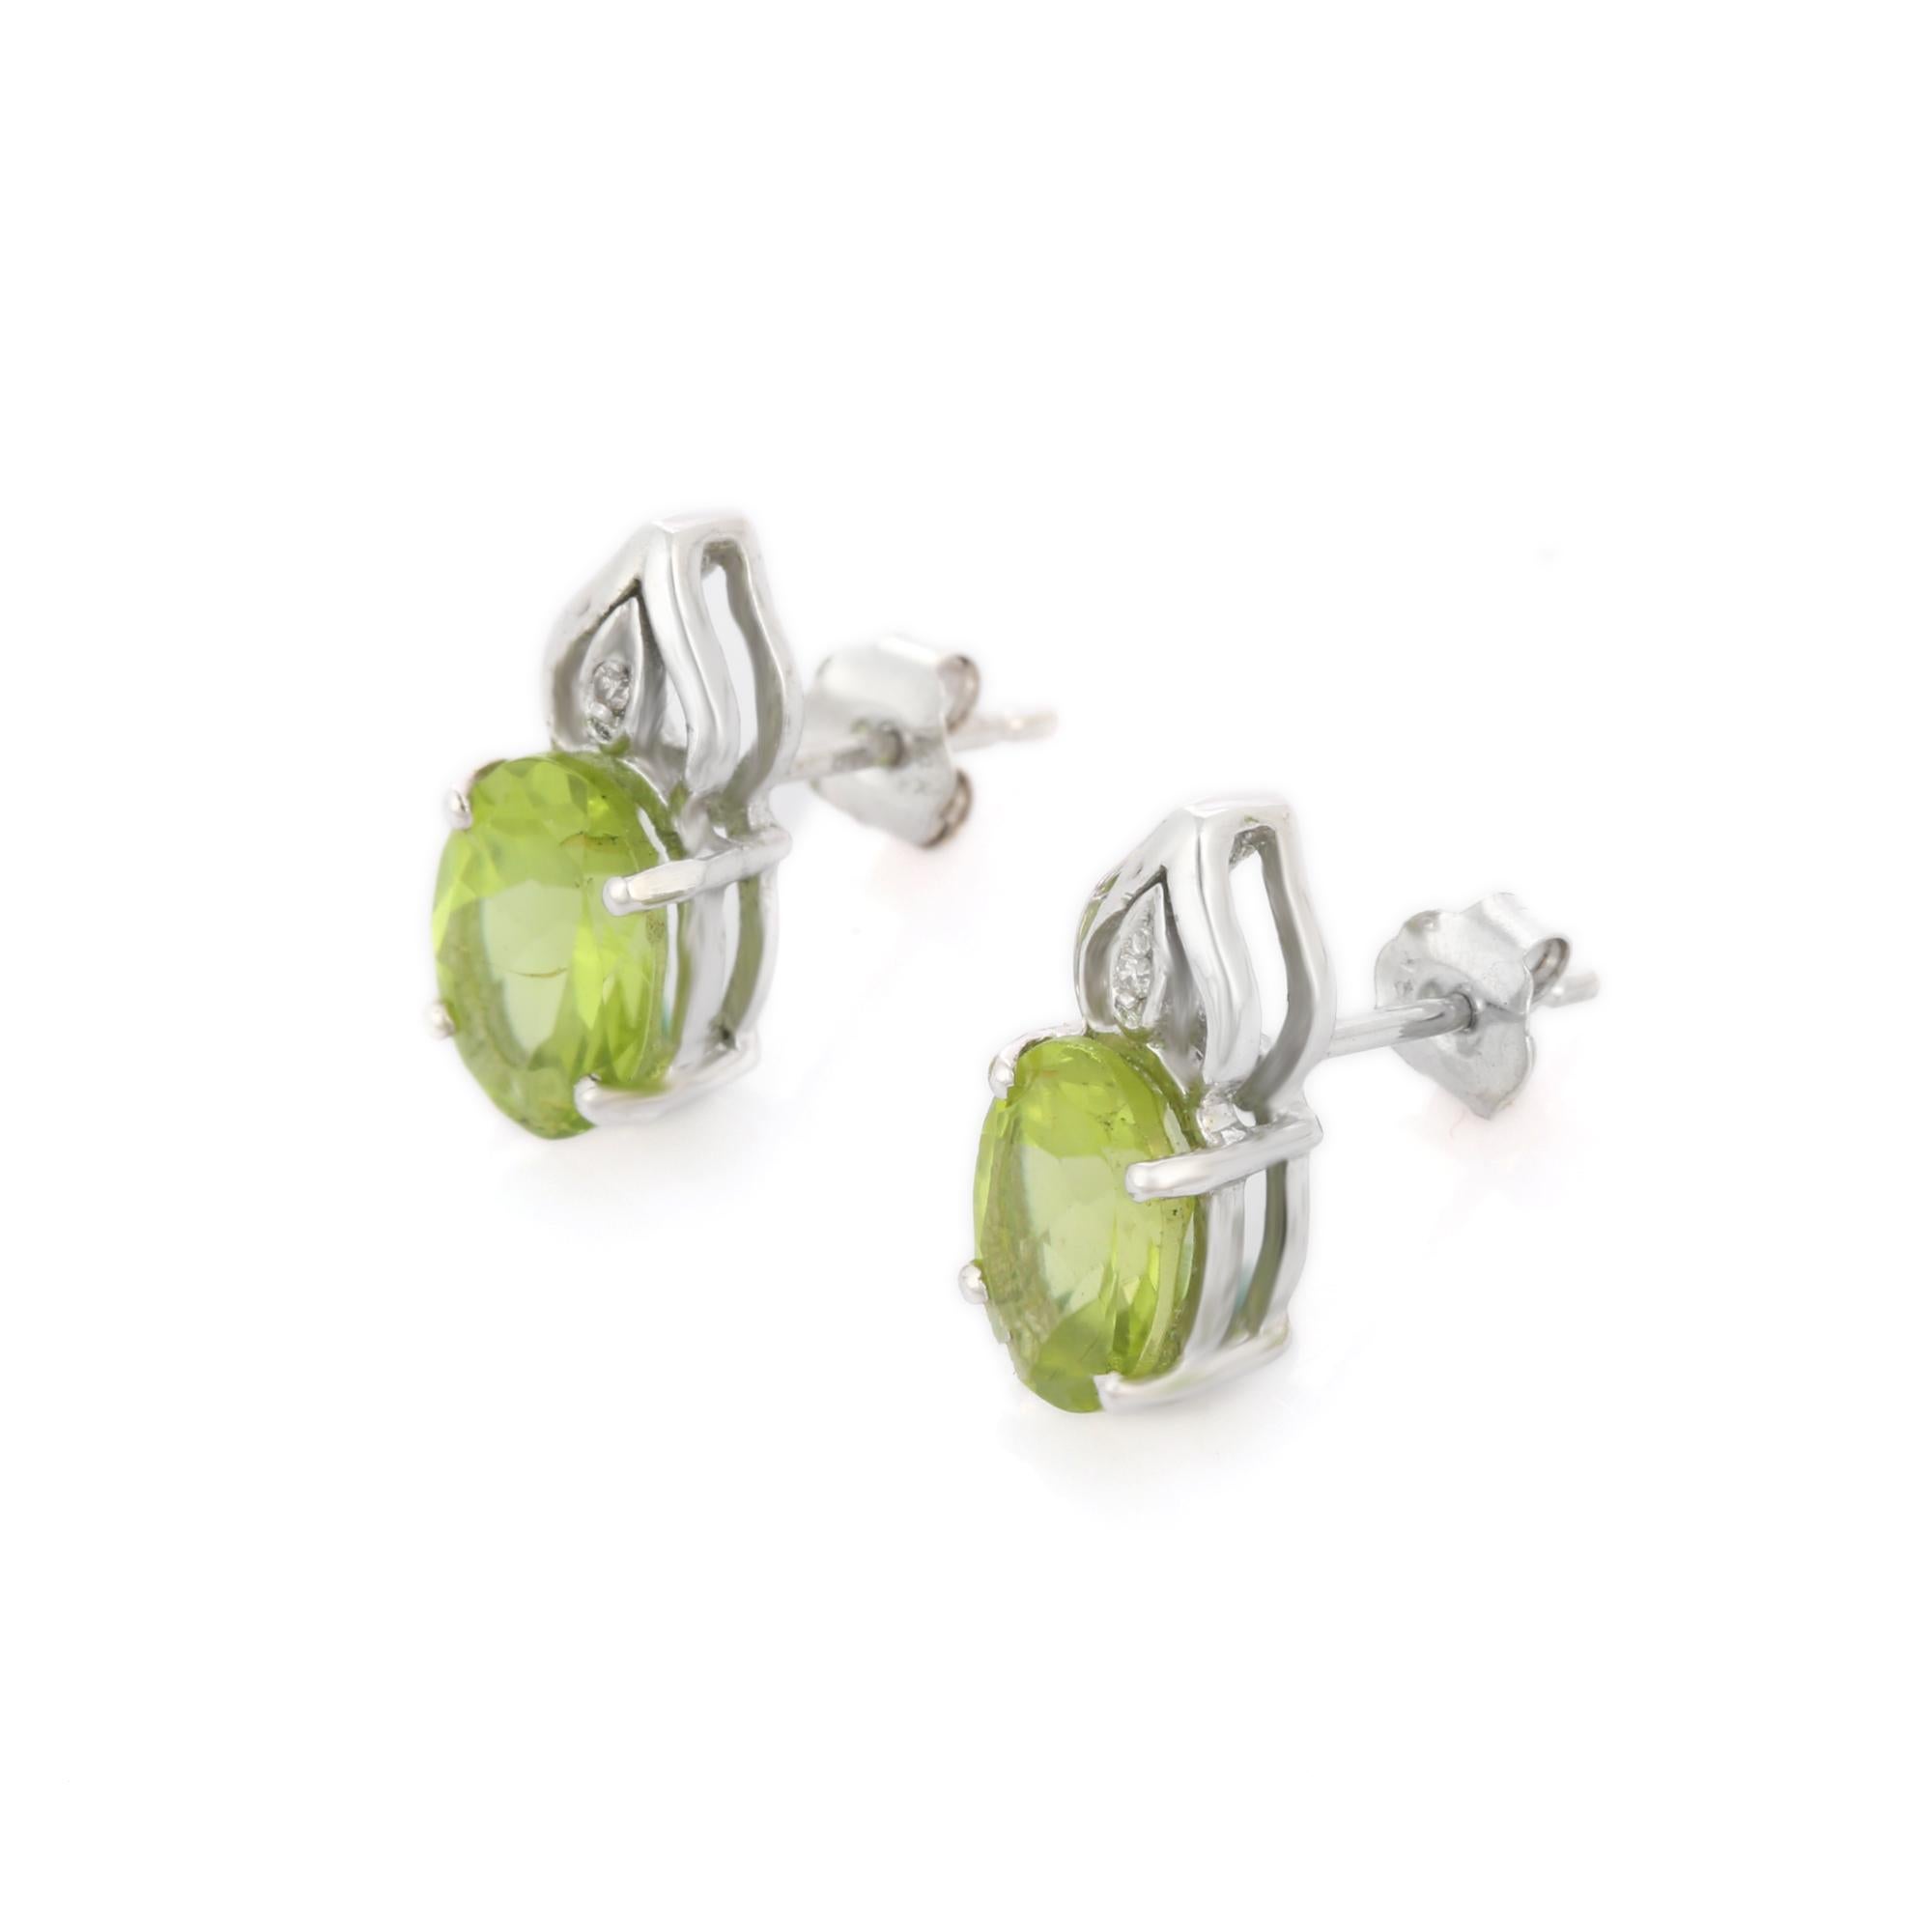 Studs create a subtle beauty while showcasing the colors of the natural precious gemstones and illuminating diamonds making a statement.

Oval cut peridot studs with diamonds in 14K gold. Embrace your look with these stunning pair of earrings